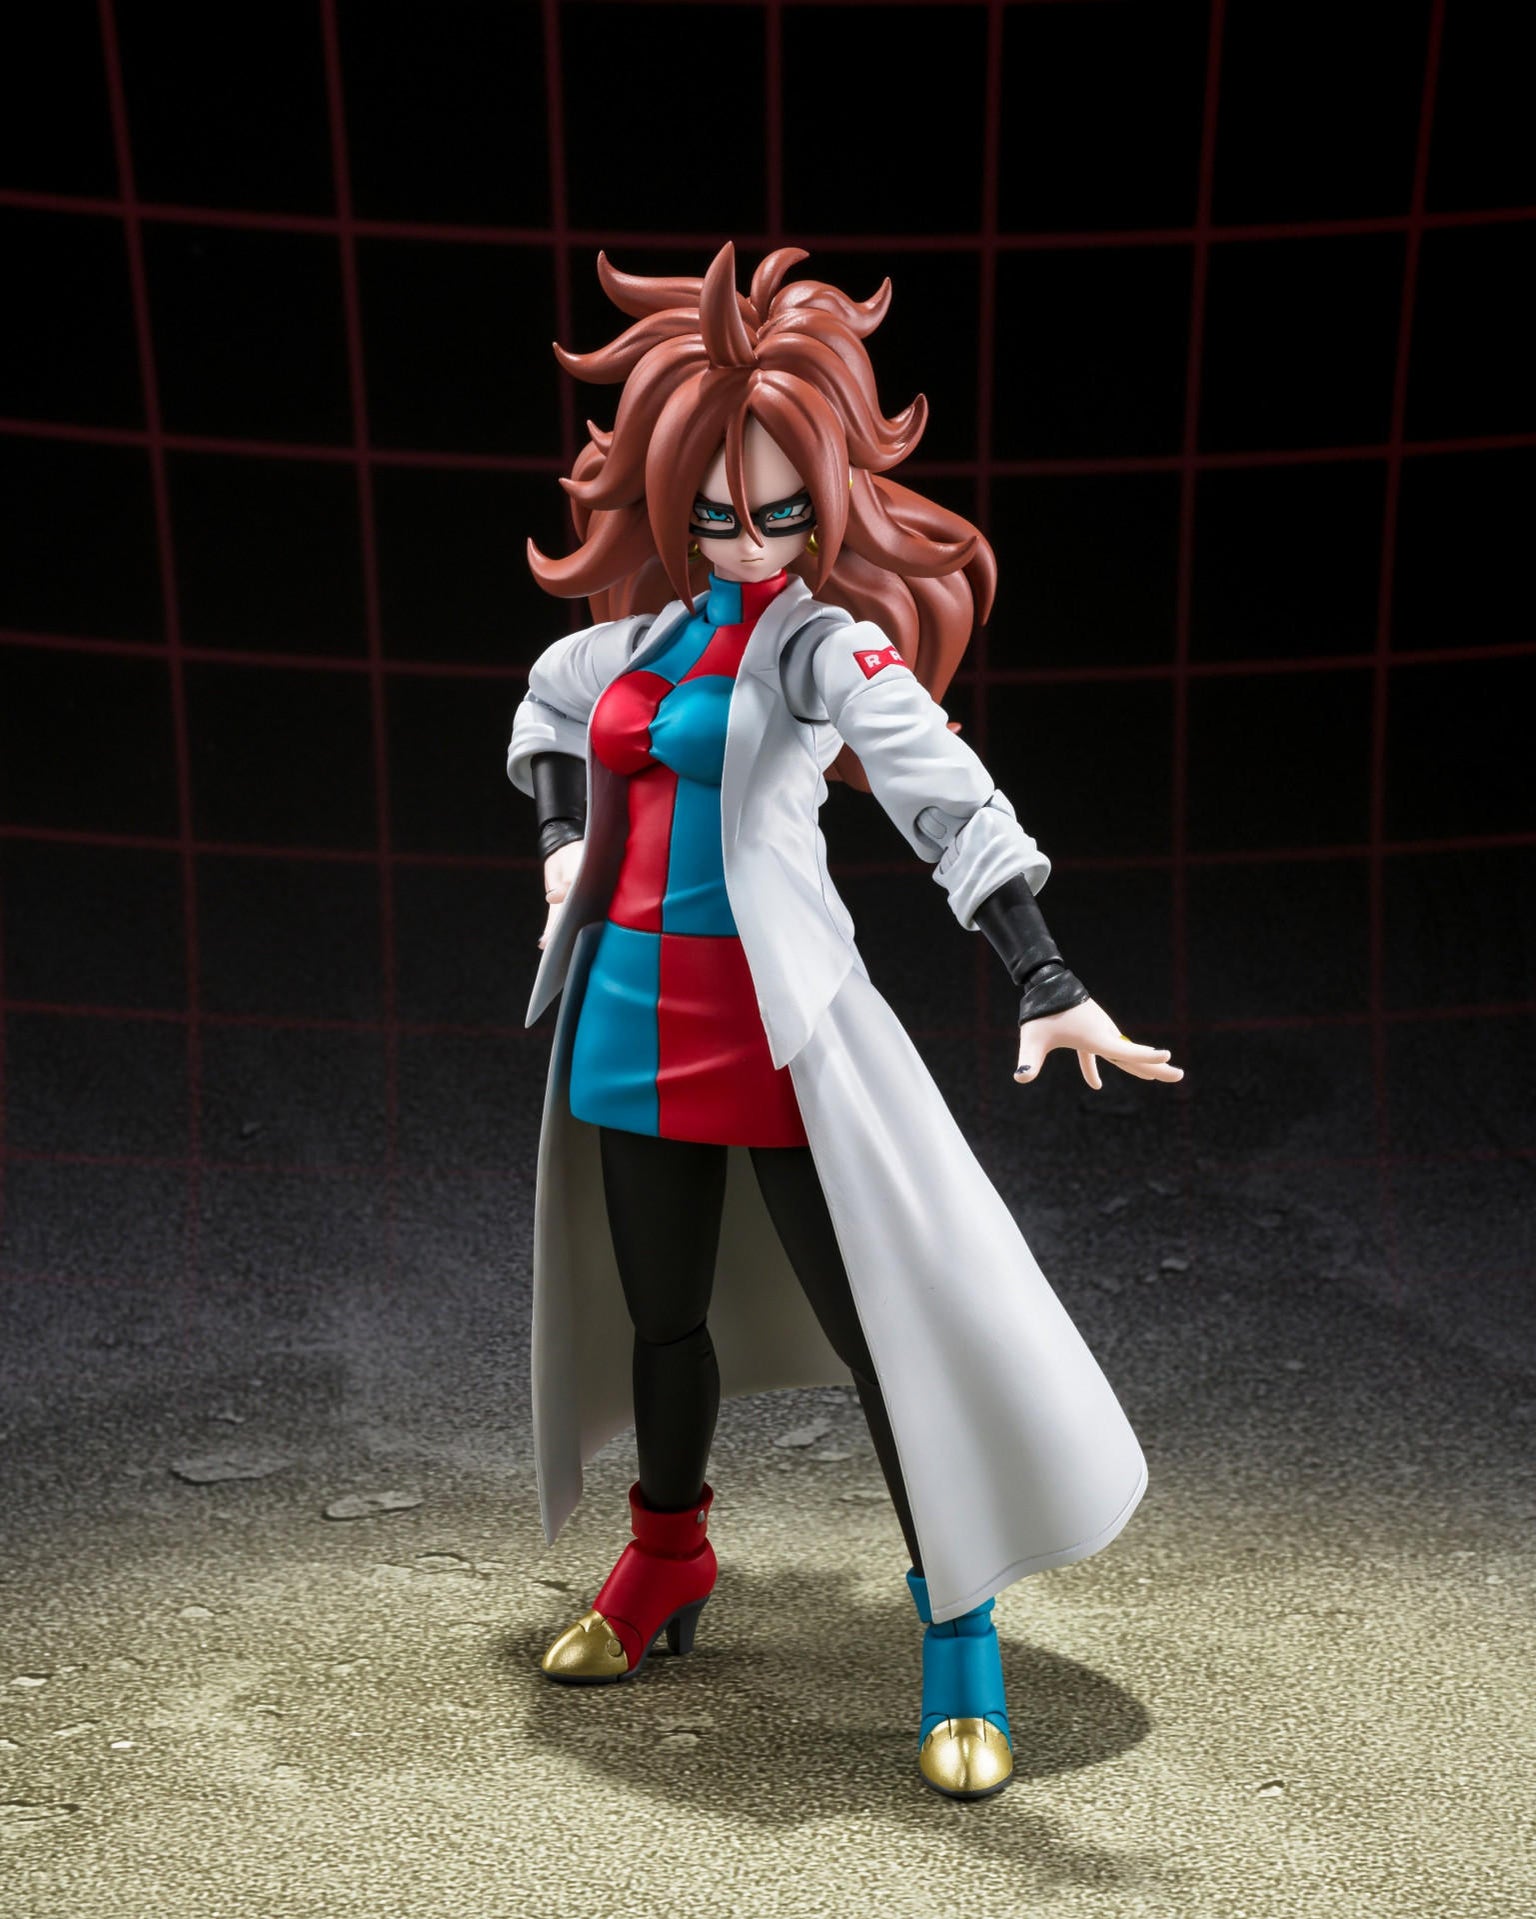 Dragon Ball Super: Super Hero Theory Points to Android 21's Arrival,  androides dragon ball super hero 